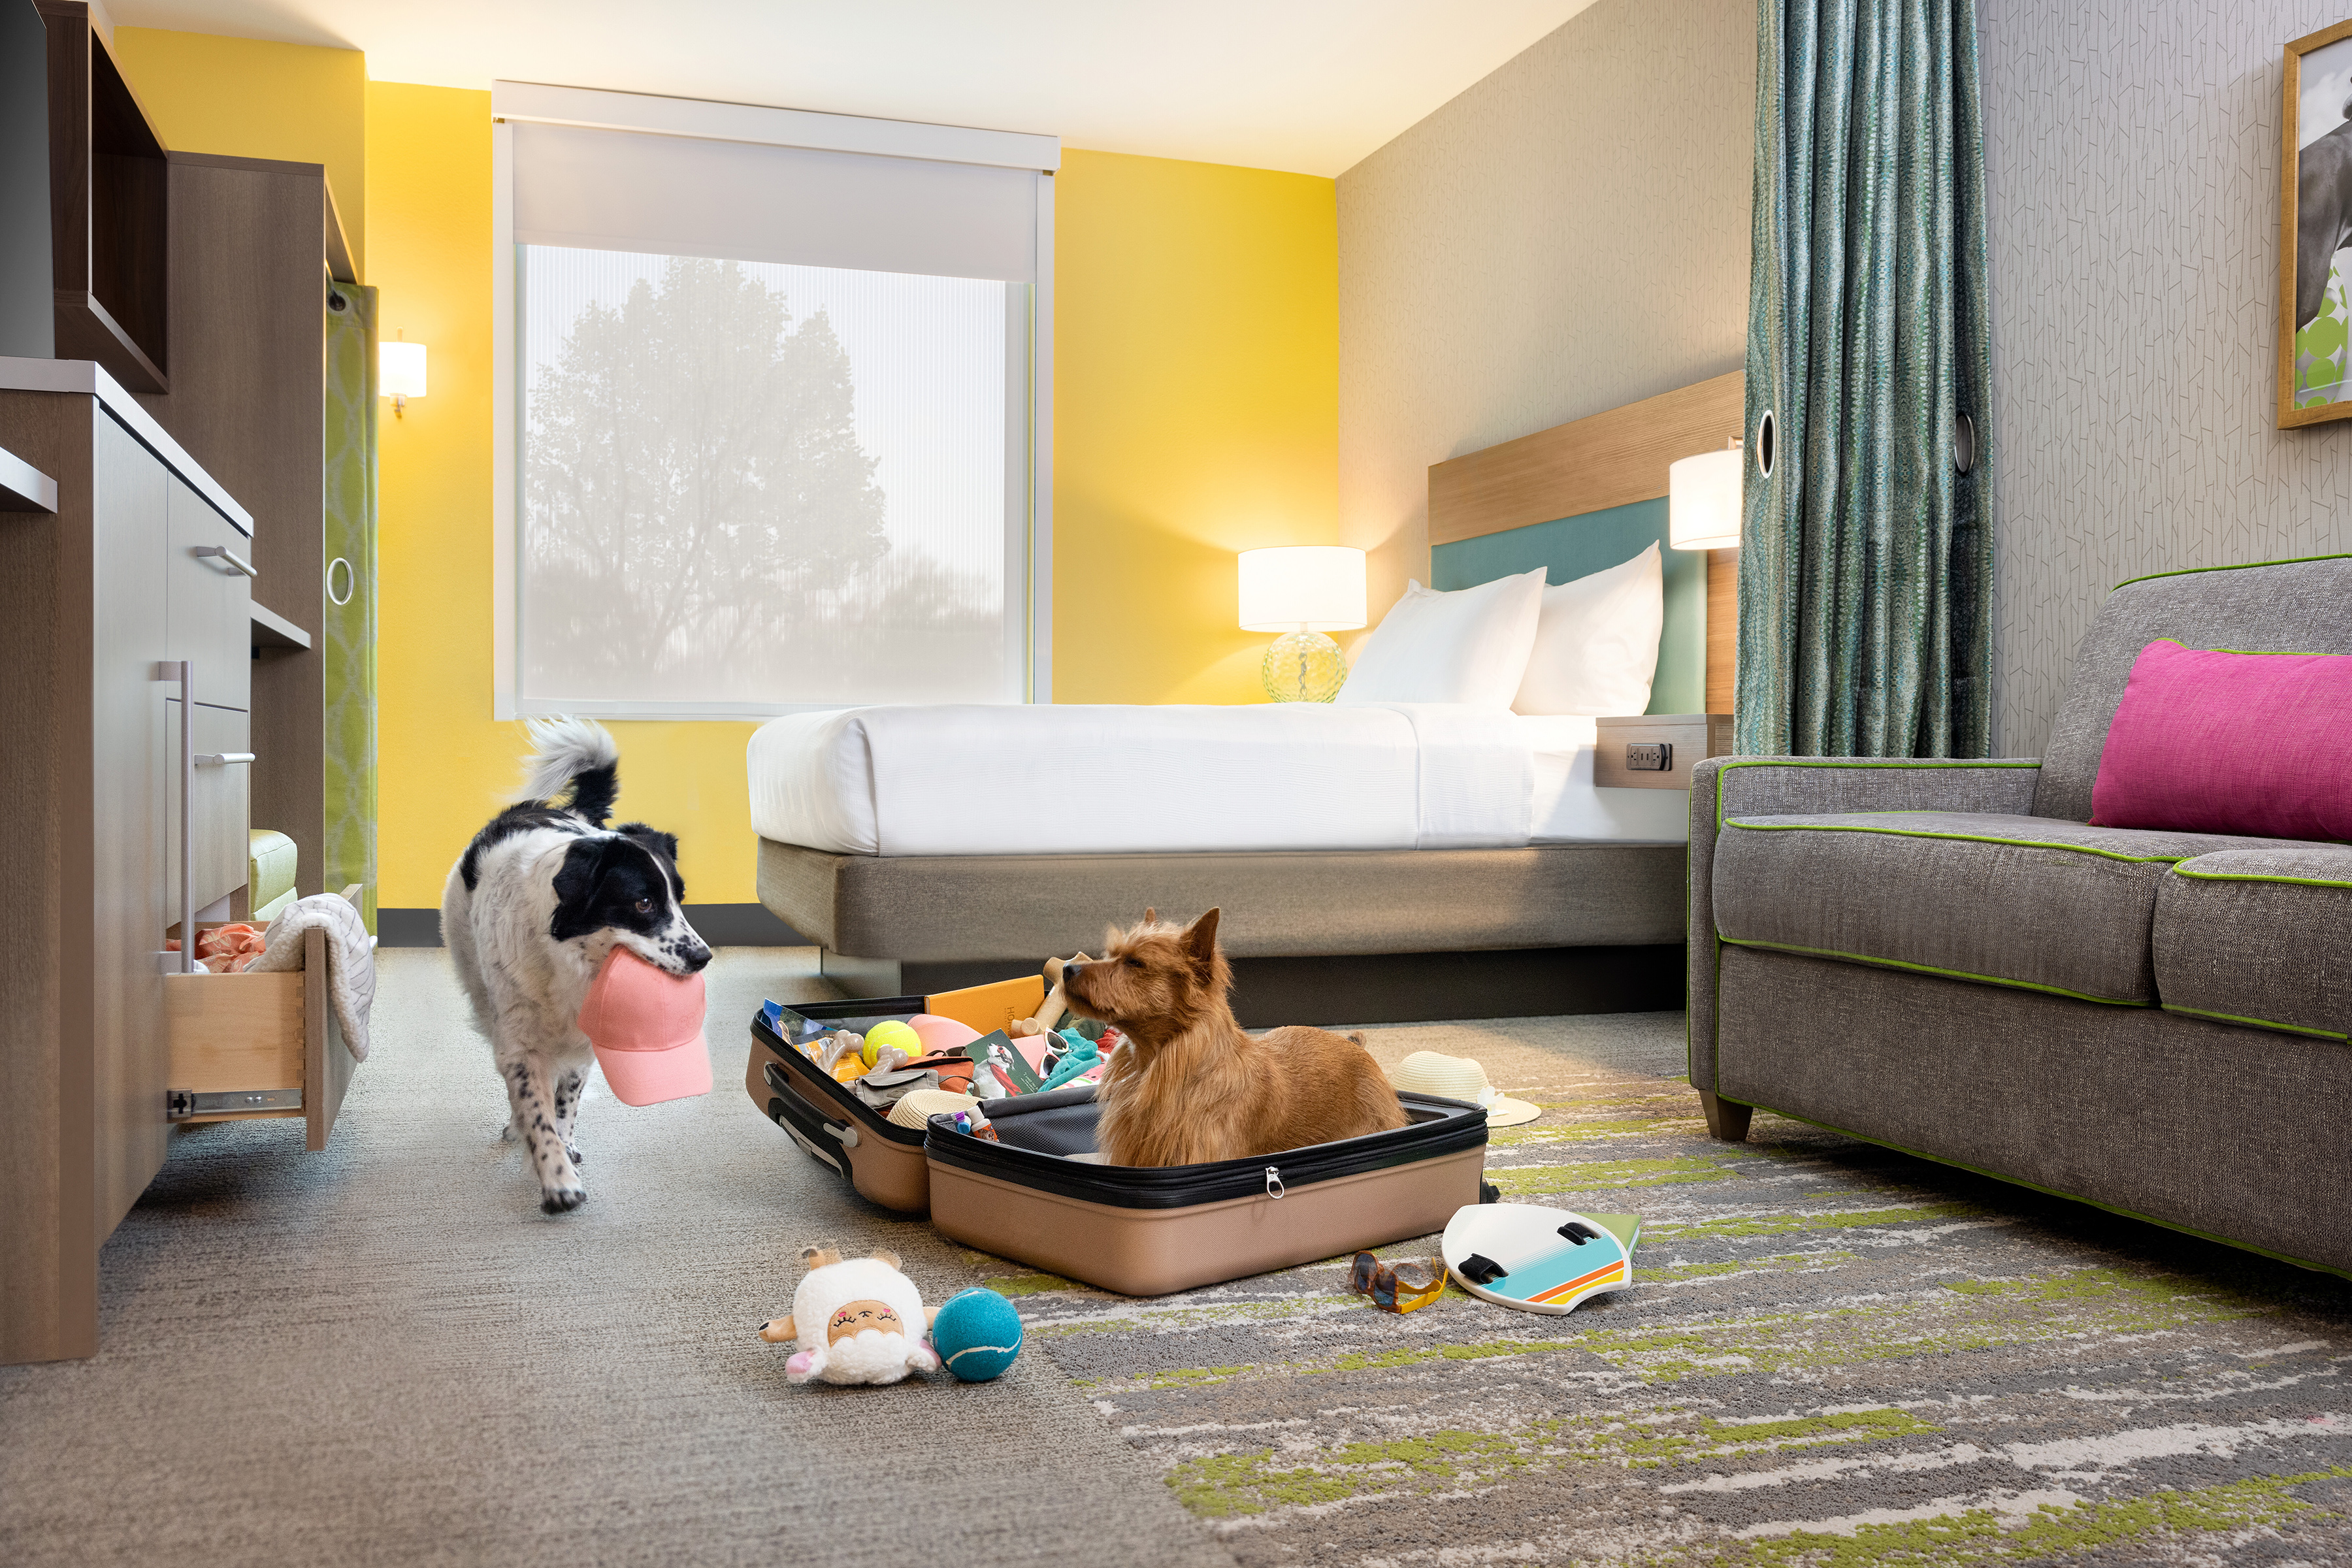 The best dog-friendly hotels with posh amenities for pets